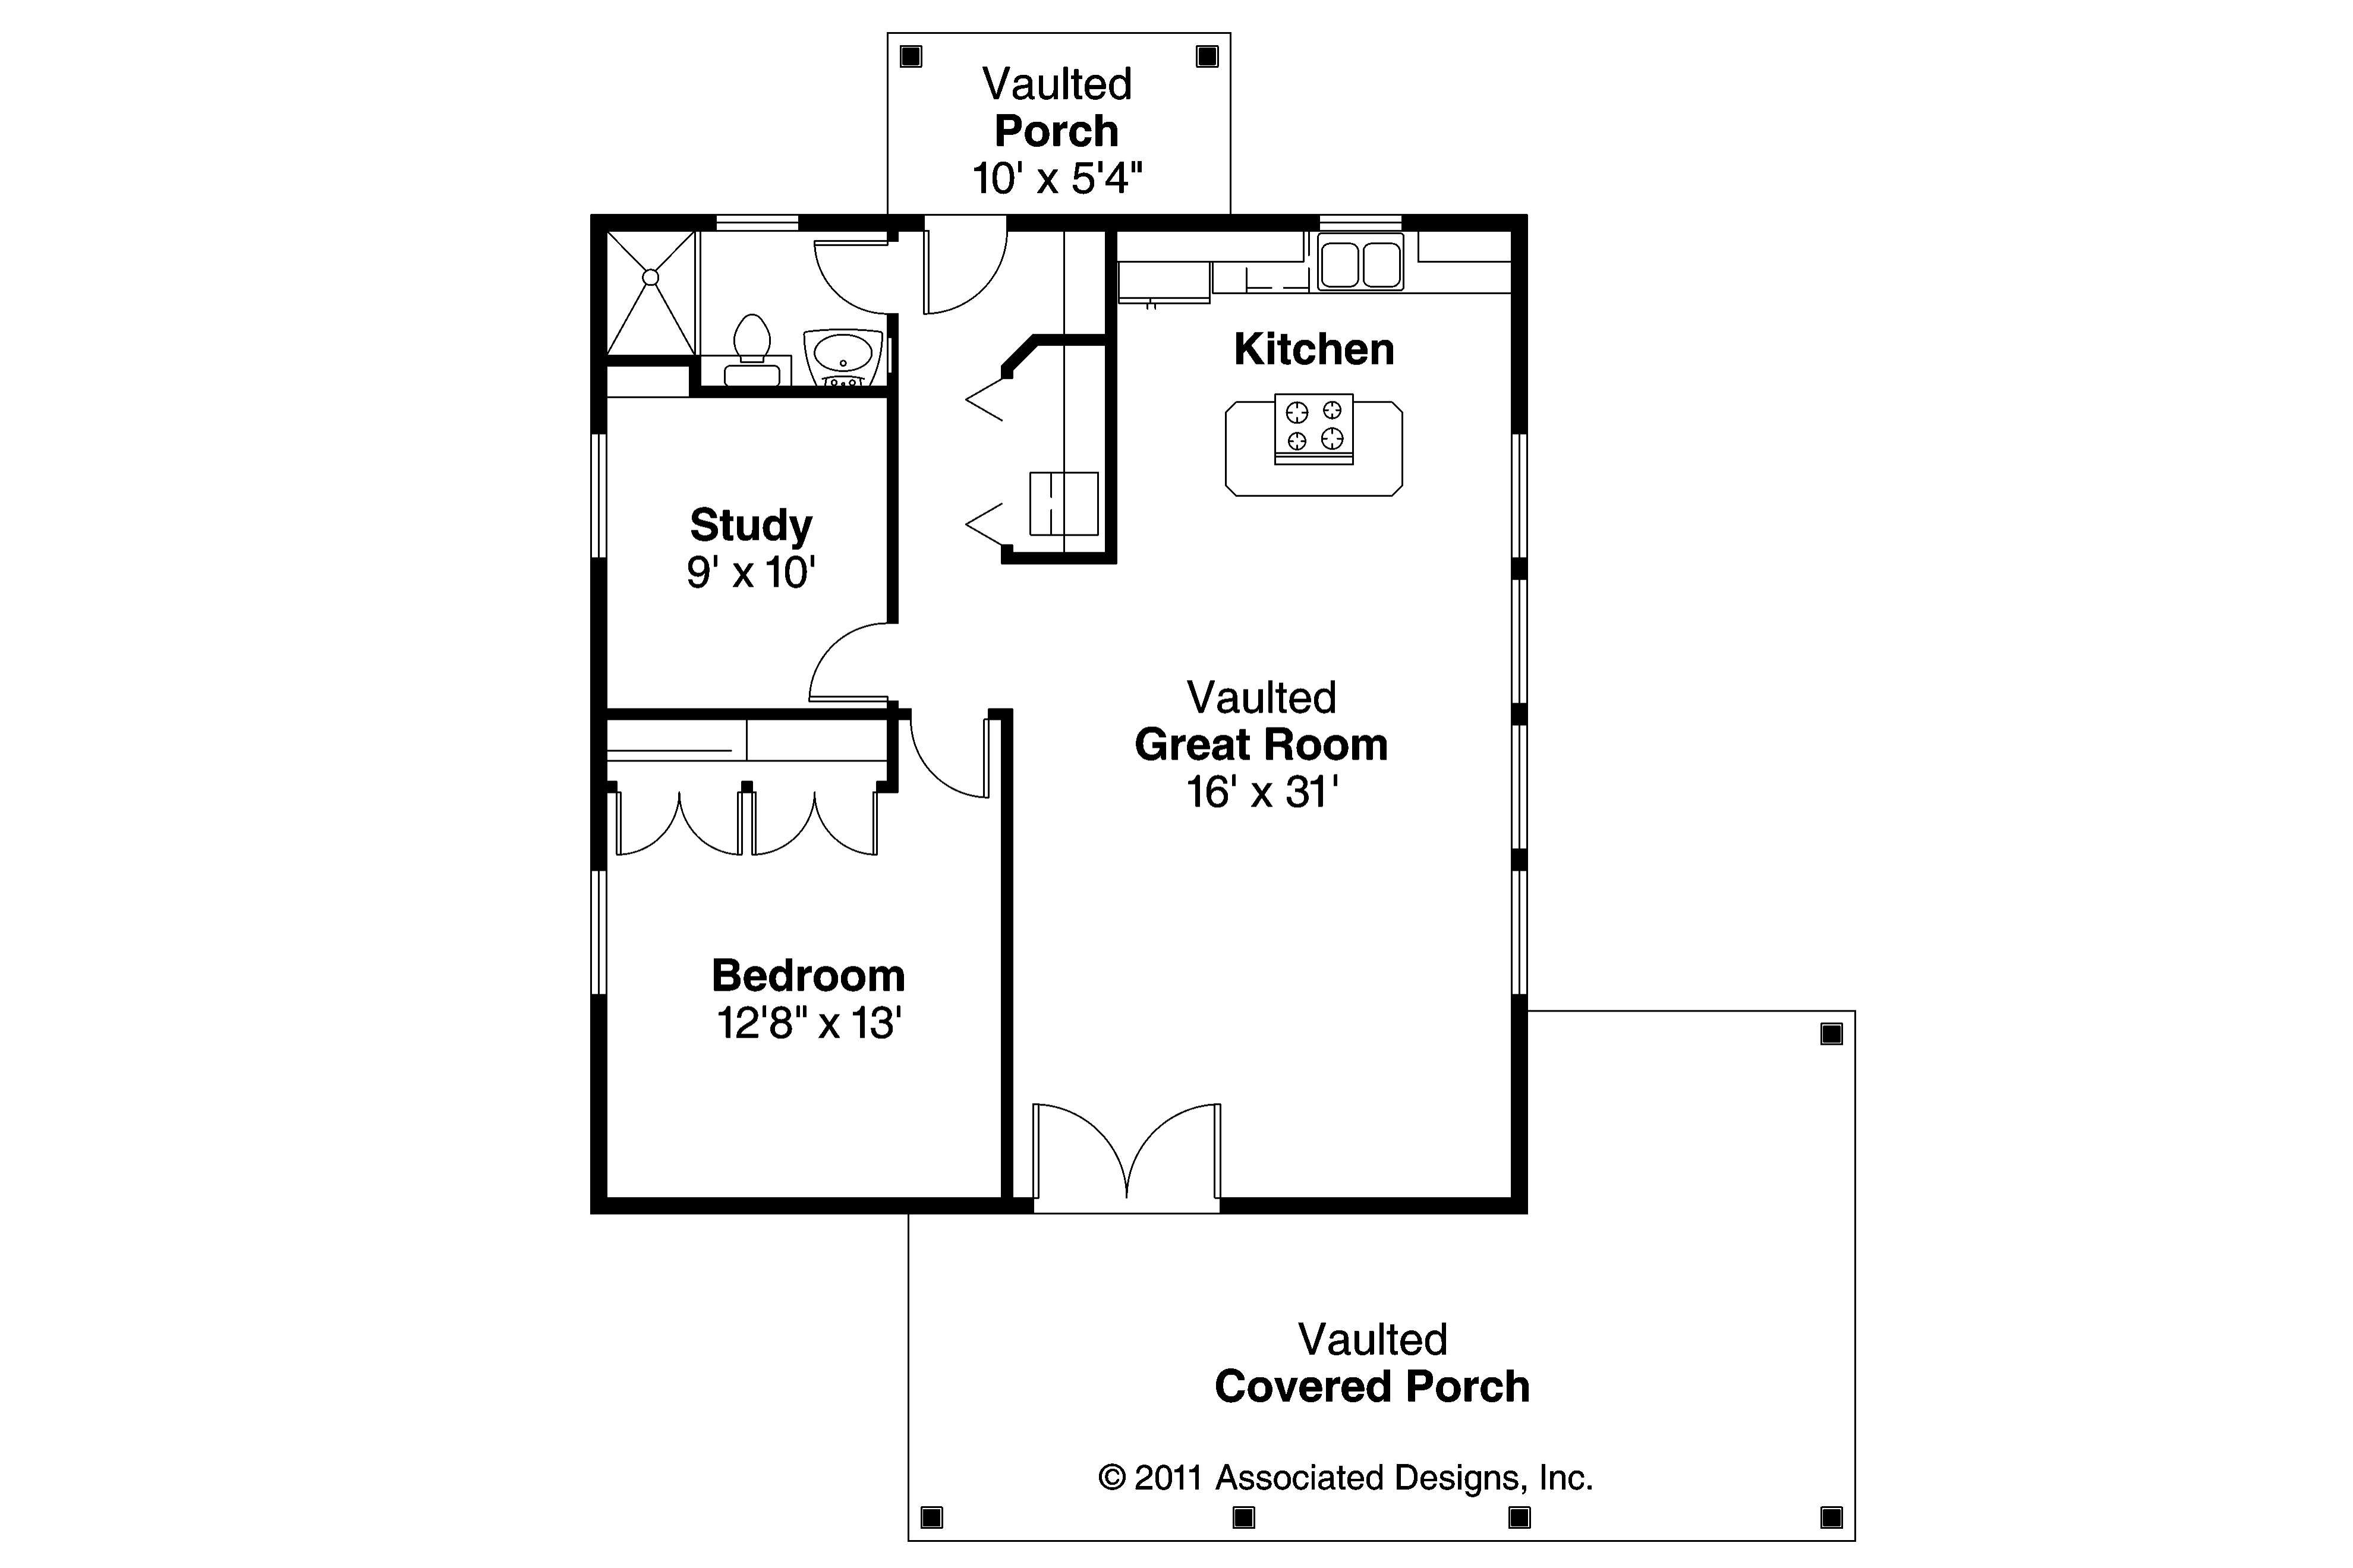 Simple House Plan And Elevation Drawings - SMMMedyam.com